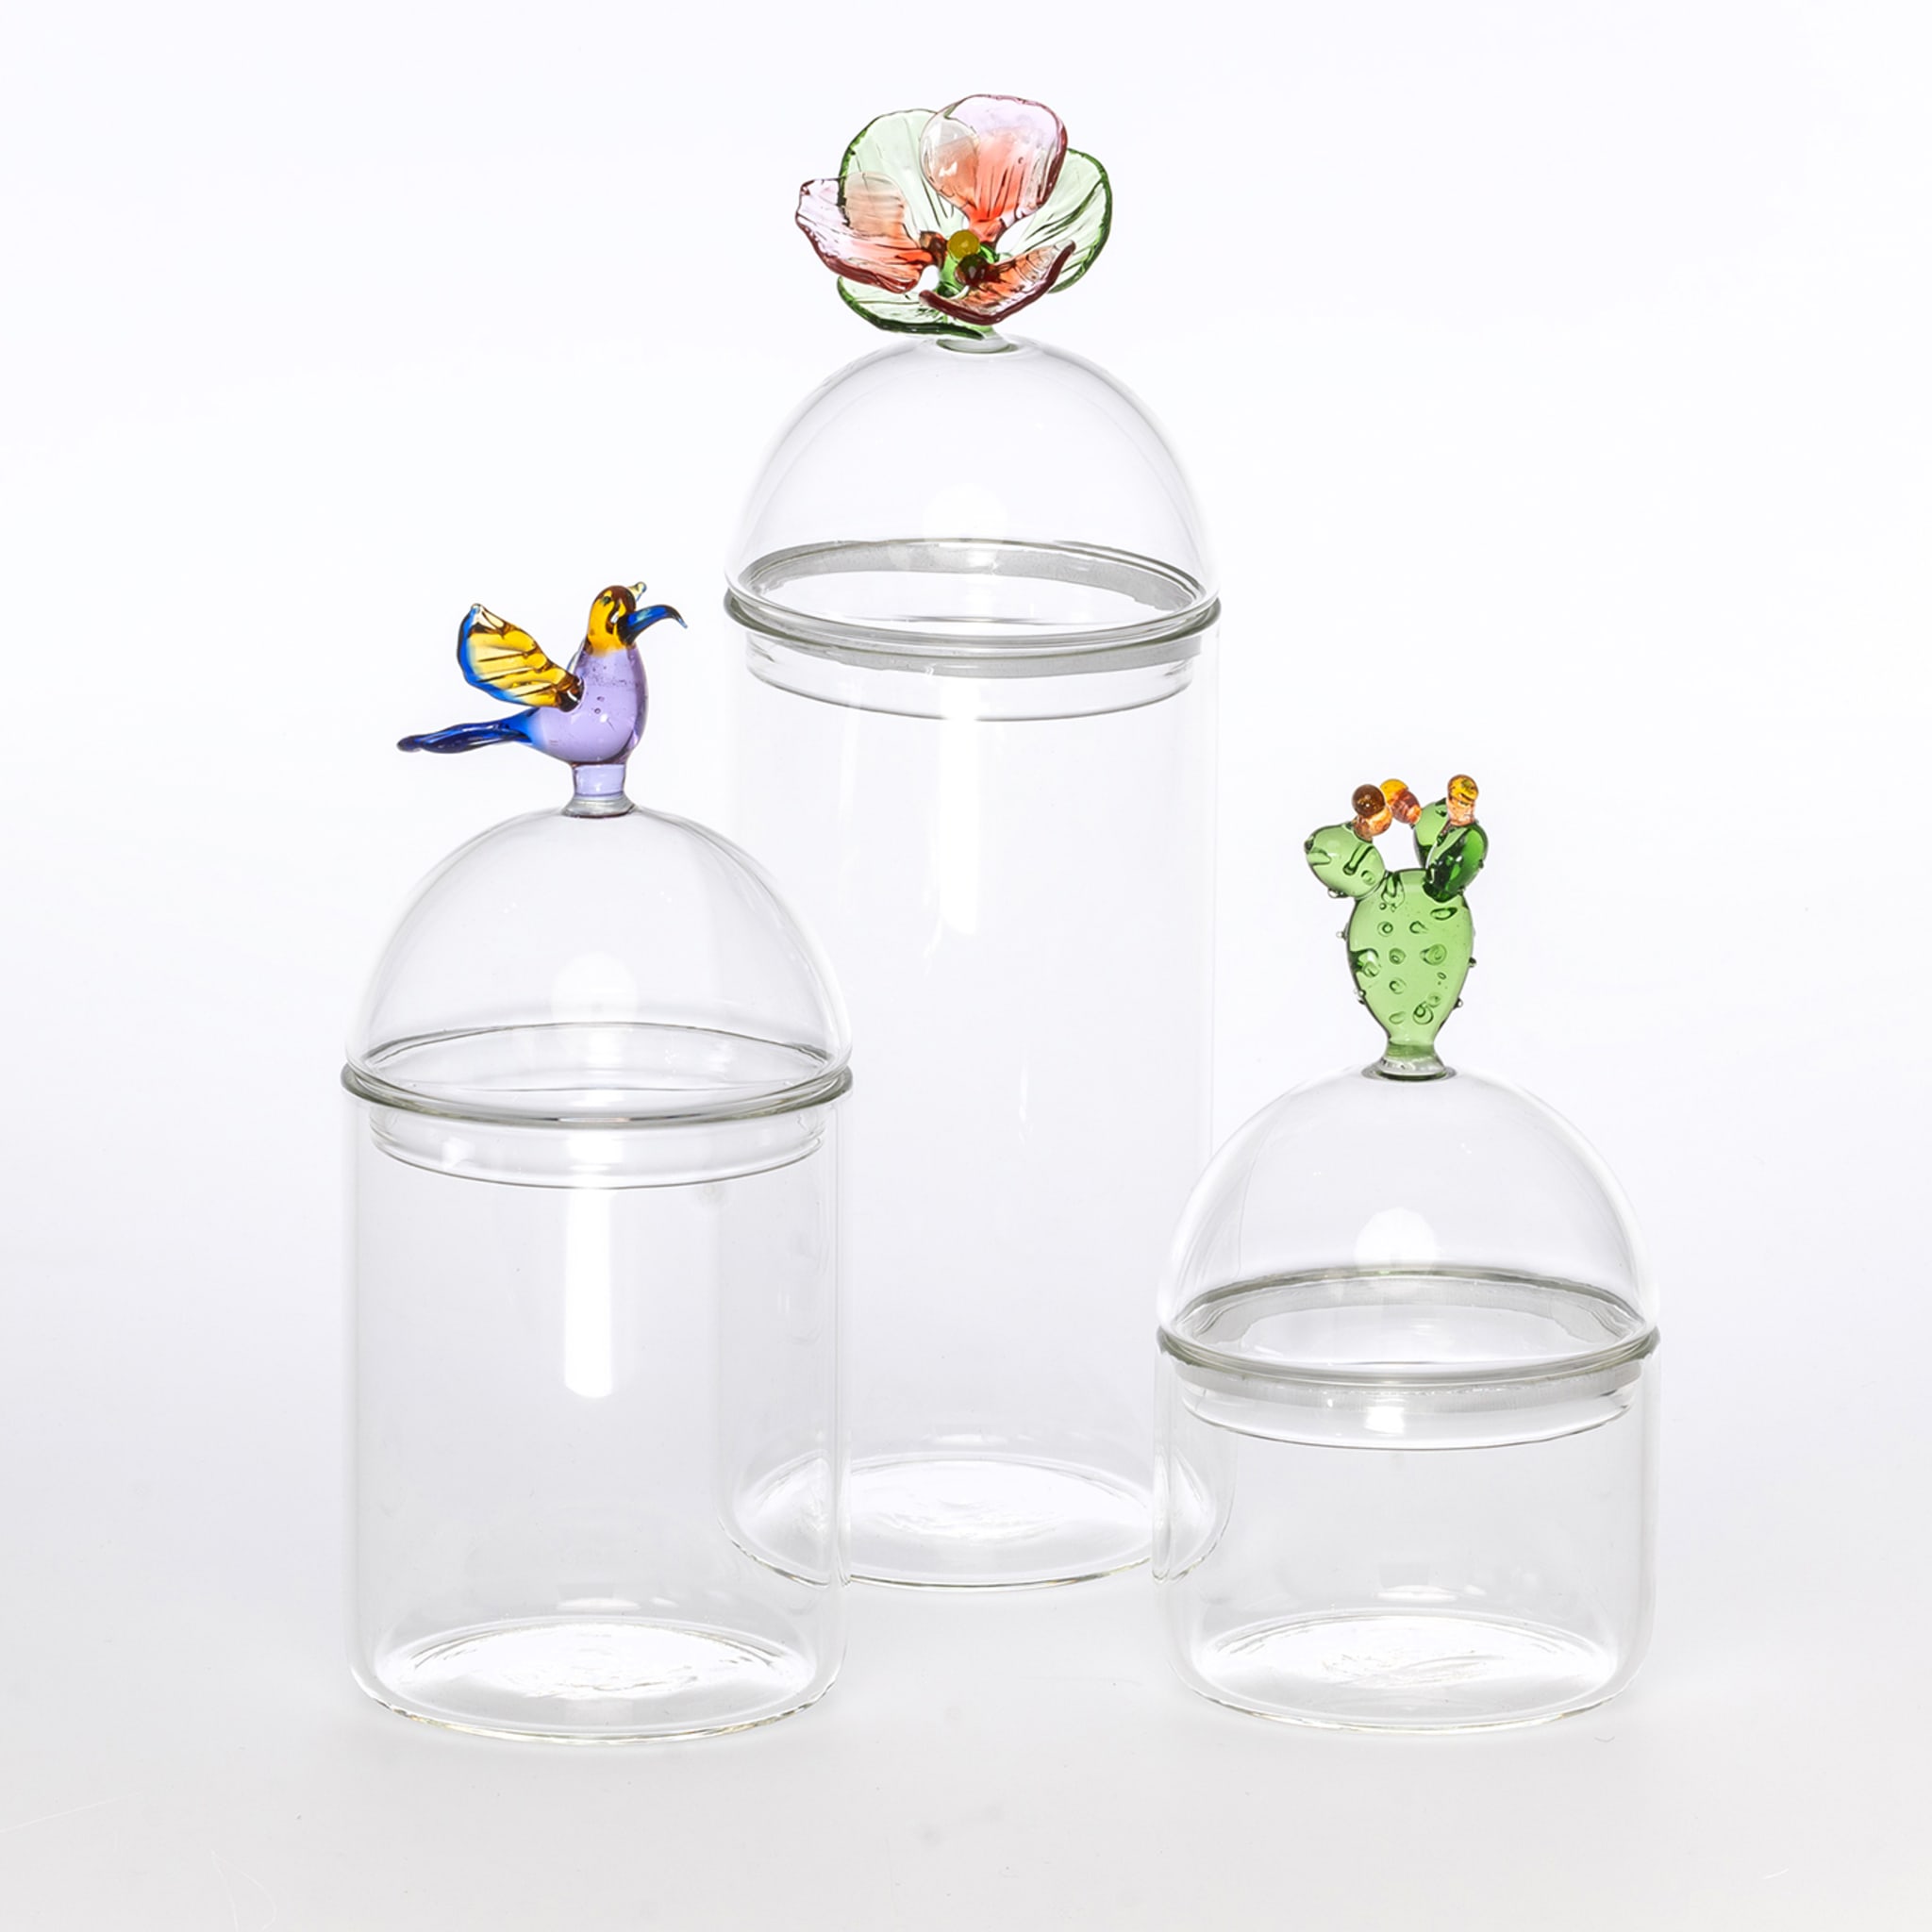 Mediterraneo Handcrafted Small Cactus Glass Container  - Alternative view 3